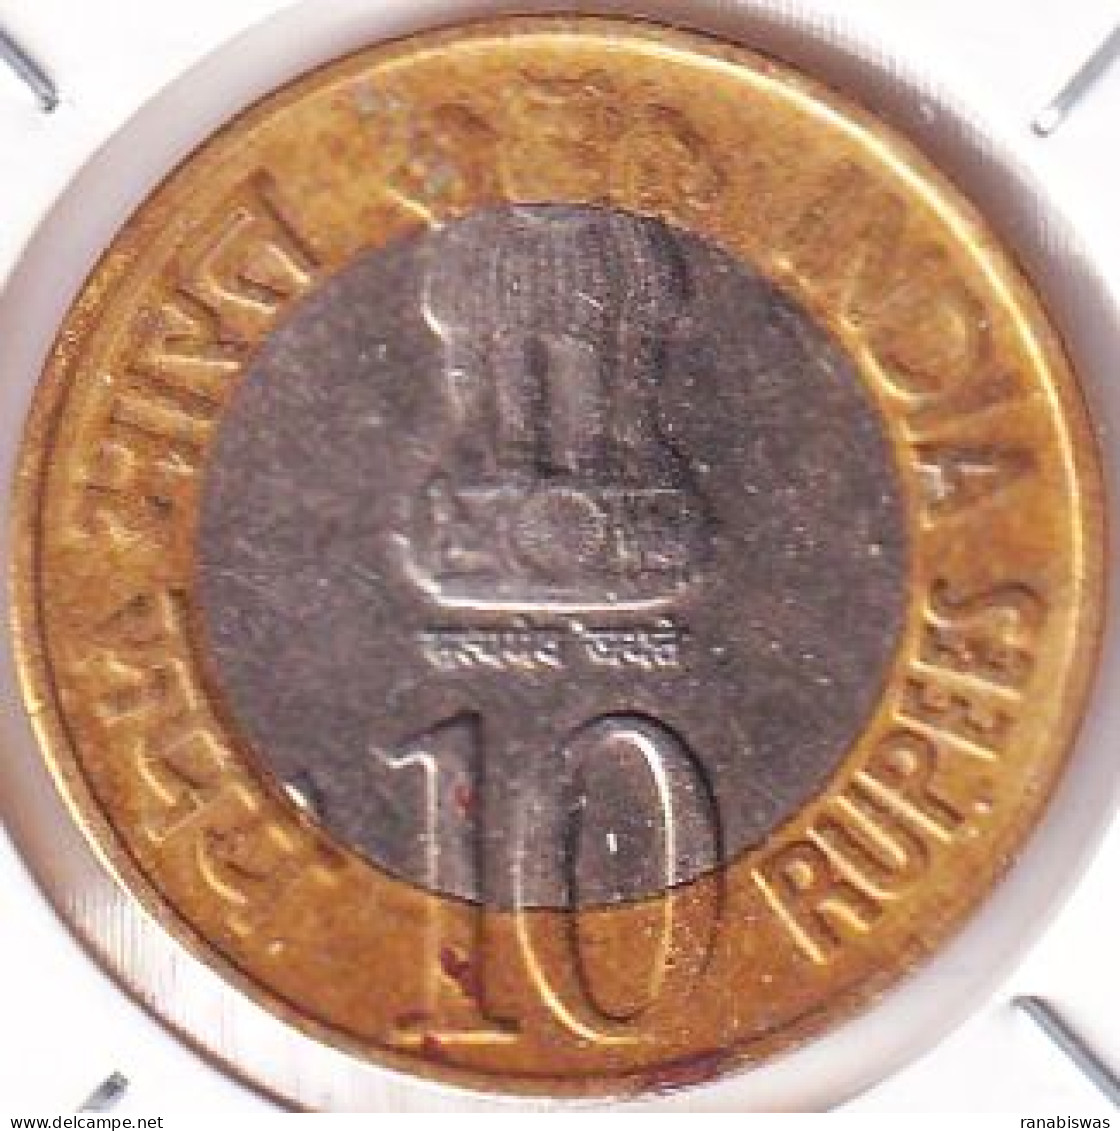 INDIA COIN LOT 453, 10 RUPEES 2010, RESERVE BANK, HYDERABAD MINT, AUNC, RARE - Indien